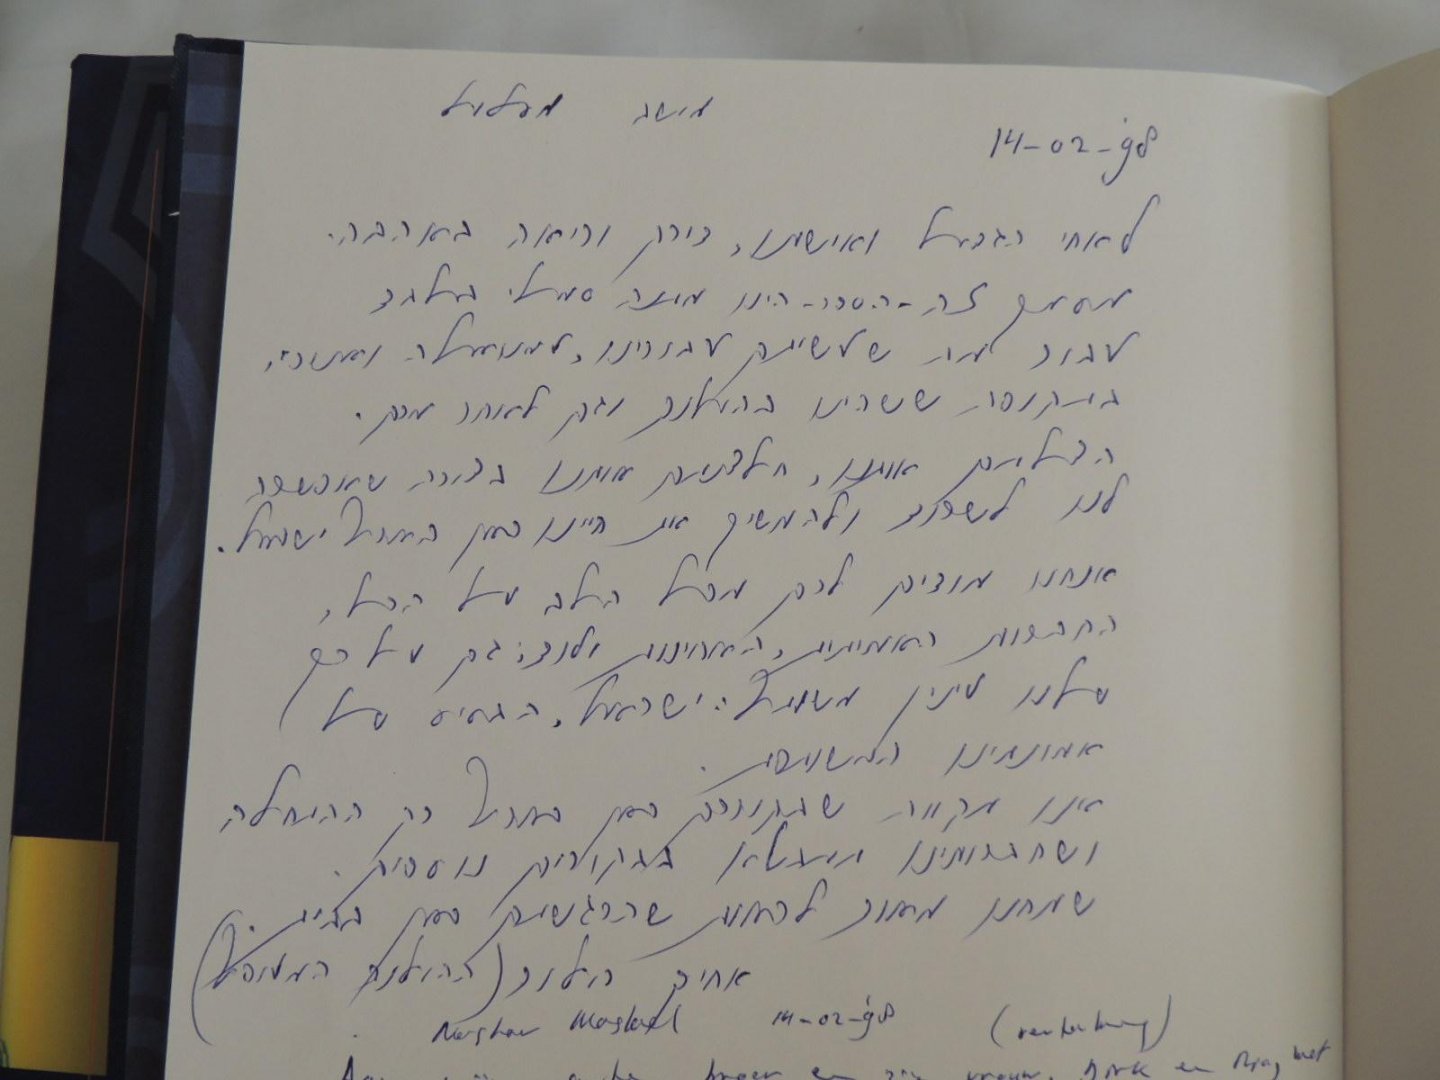 Nissim Mishal; Yedioth Aḥronoth - Those were the years ... Israel's Jubilee